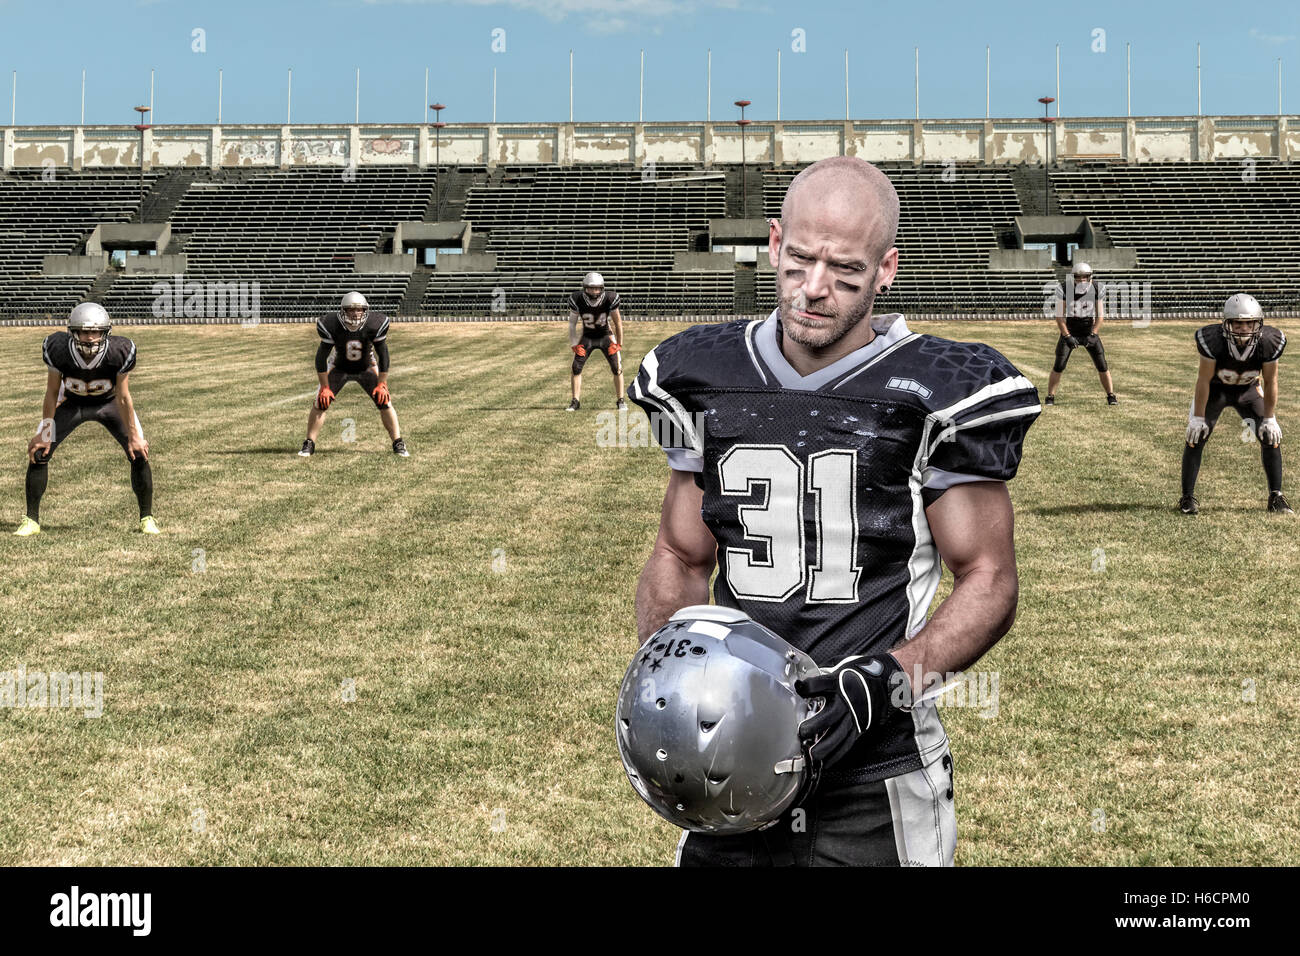 Portrait of a serious looking american football player, who stands  in a desolate stadium. Stock Photo